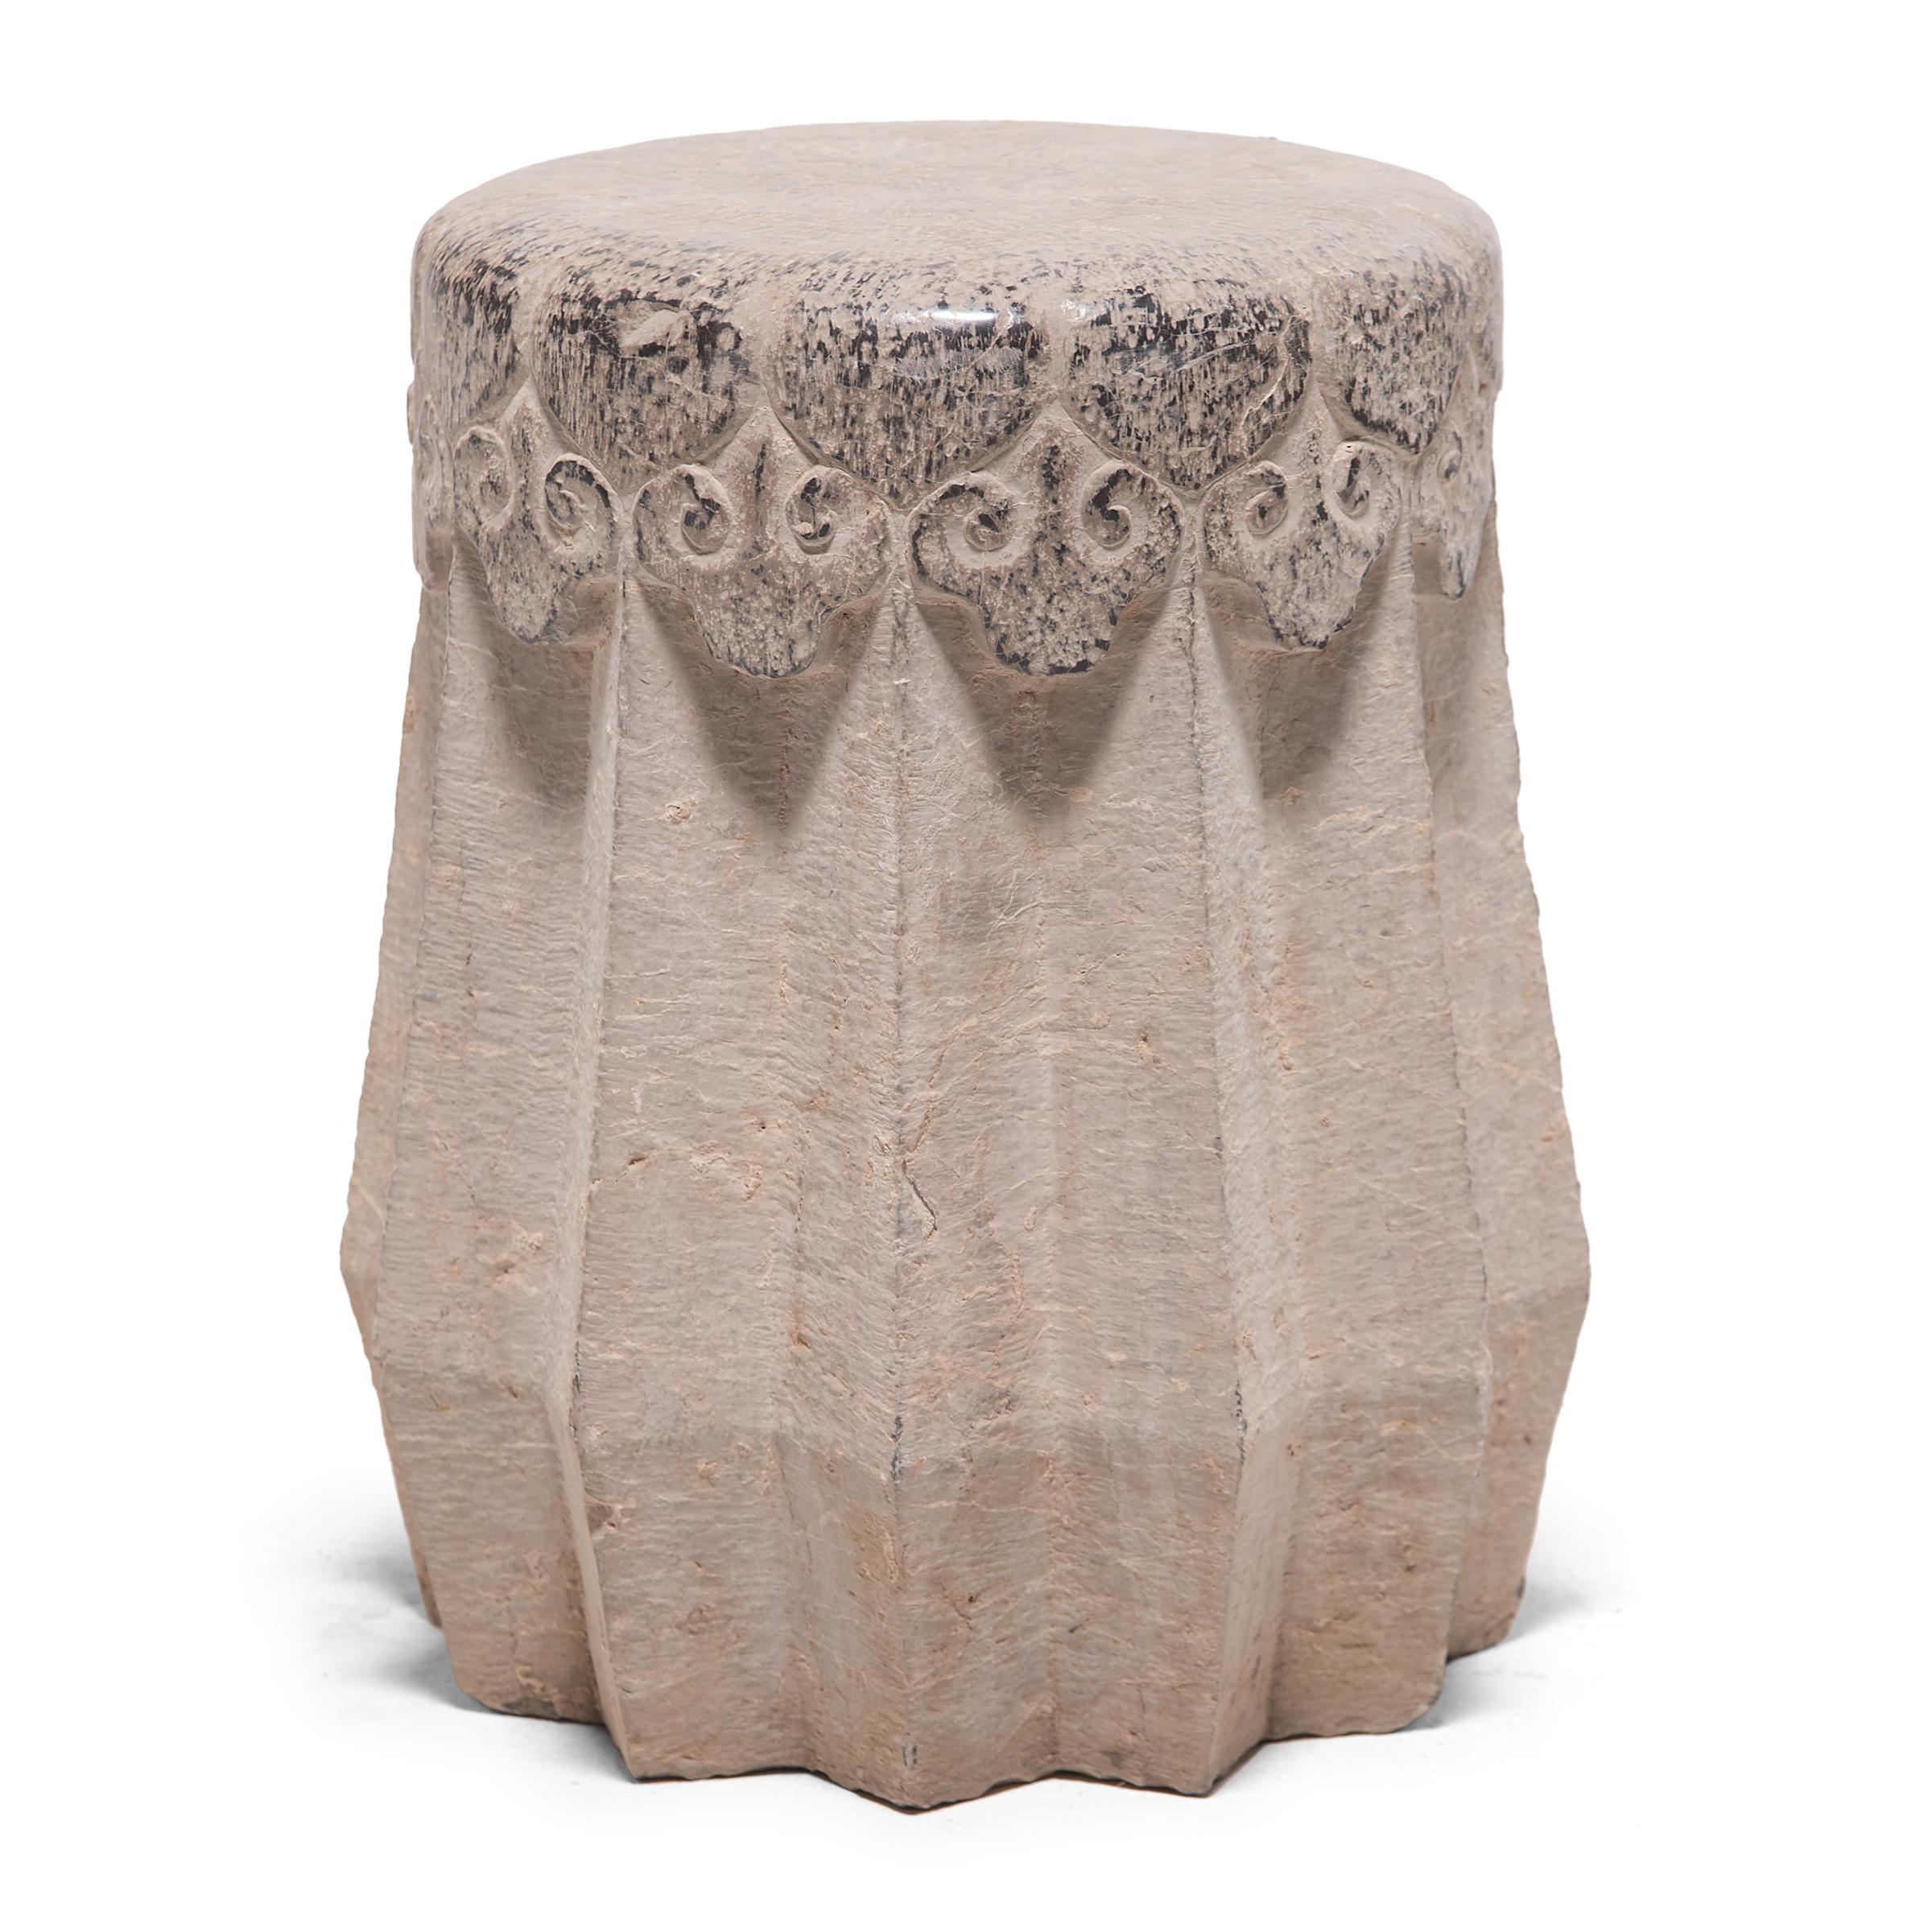 Carved from a solid block of limestone, this early 20th century drum stool began its life in China's Shanxi province. A variation of the traditional melon form, the stool has angular ridges running down the sides in a zig-zag pattern. The smoothed